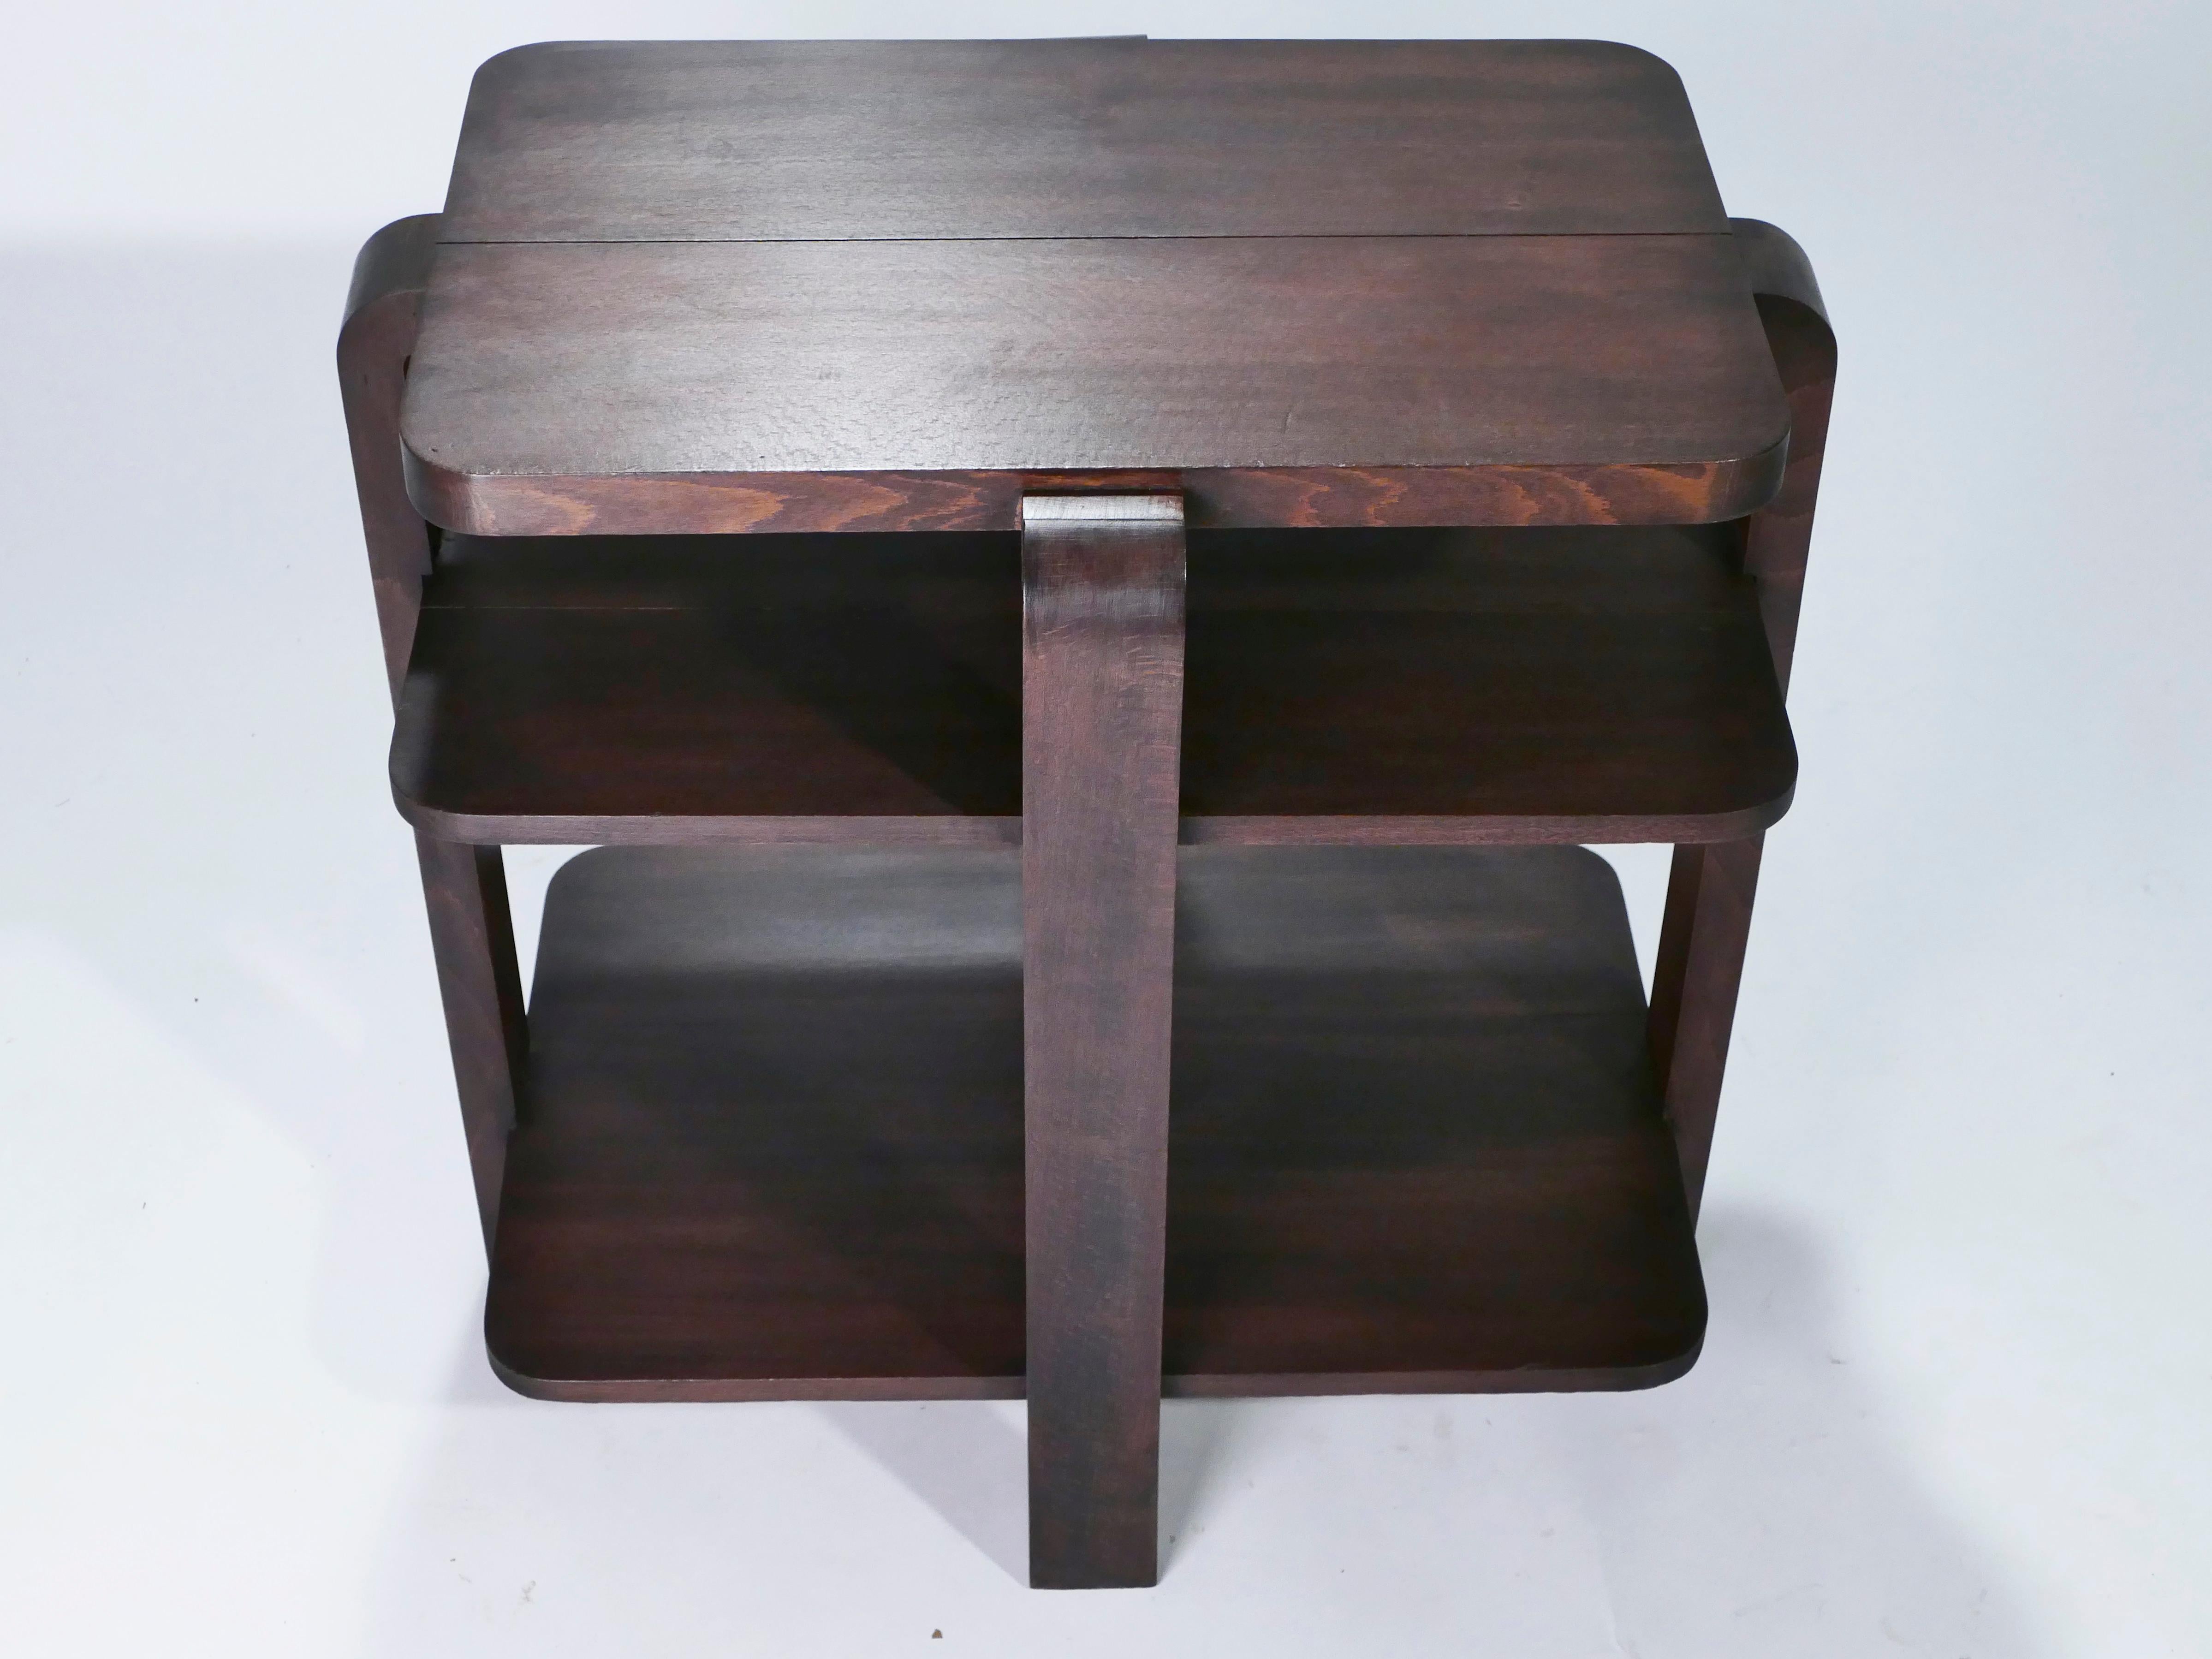 French Art Deco Modernist Mahogany Side Table, 1940s For Sale 4